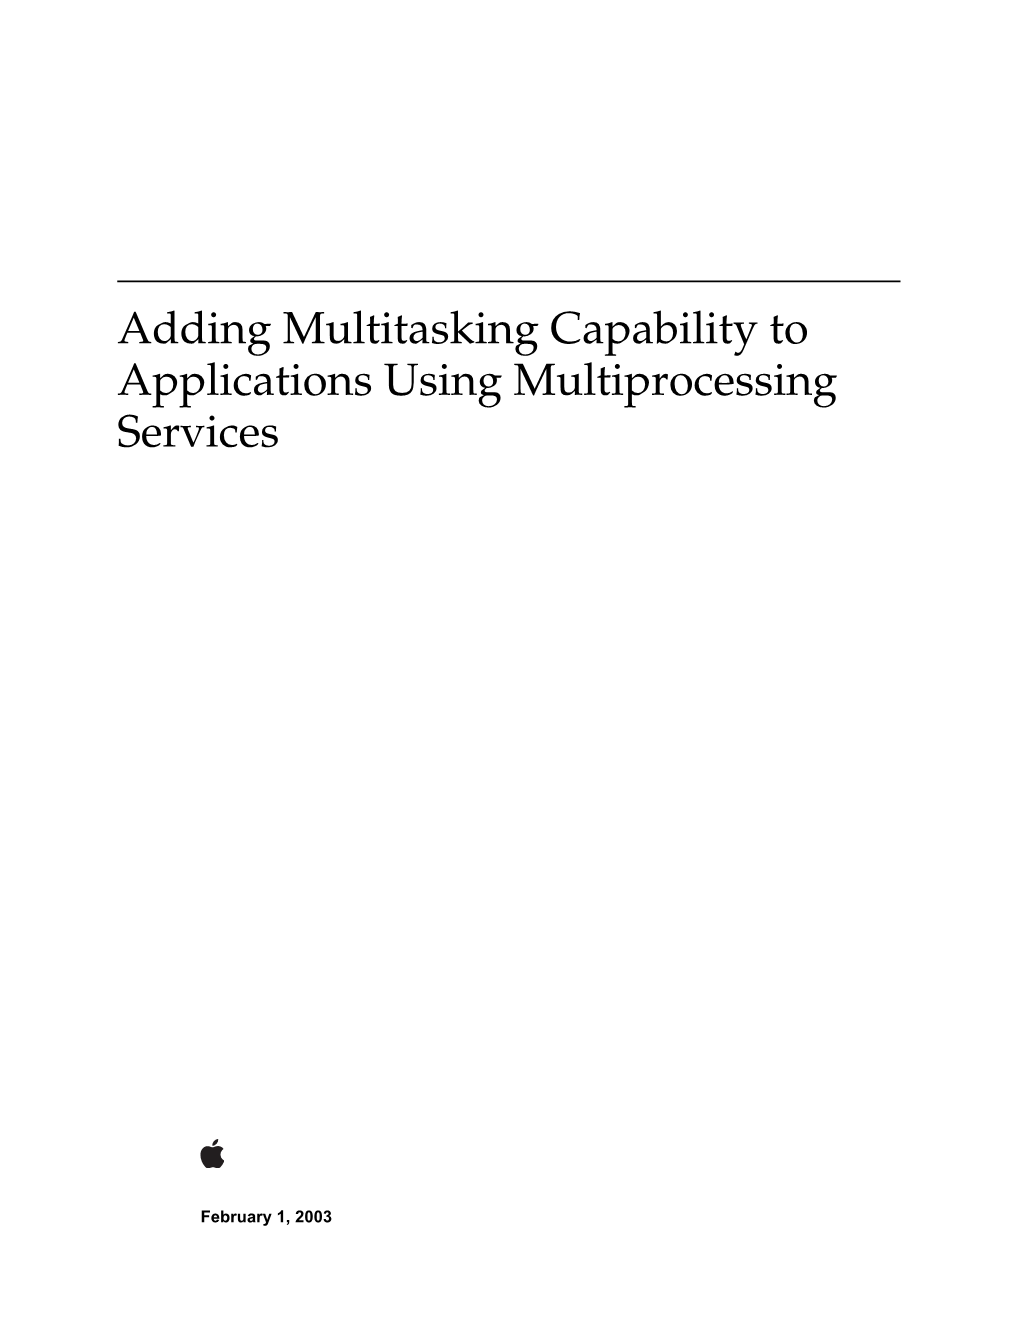 Adding Multitasking Capability to Applications Using Multiprocessing Services